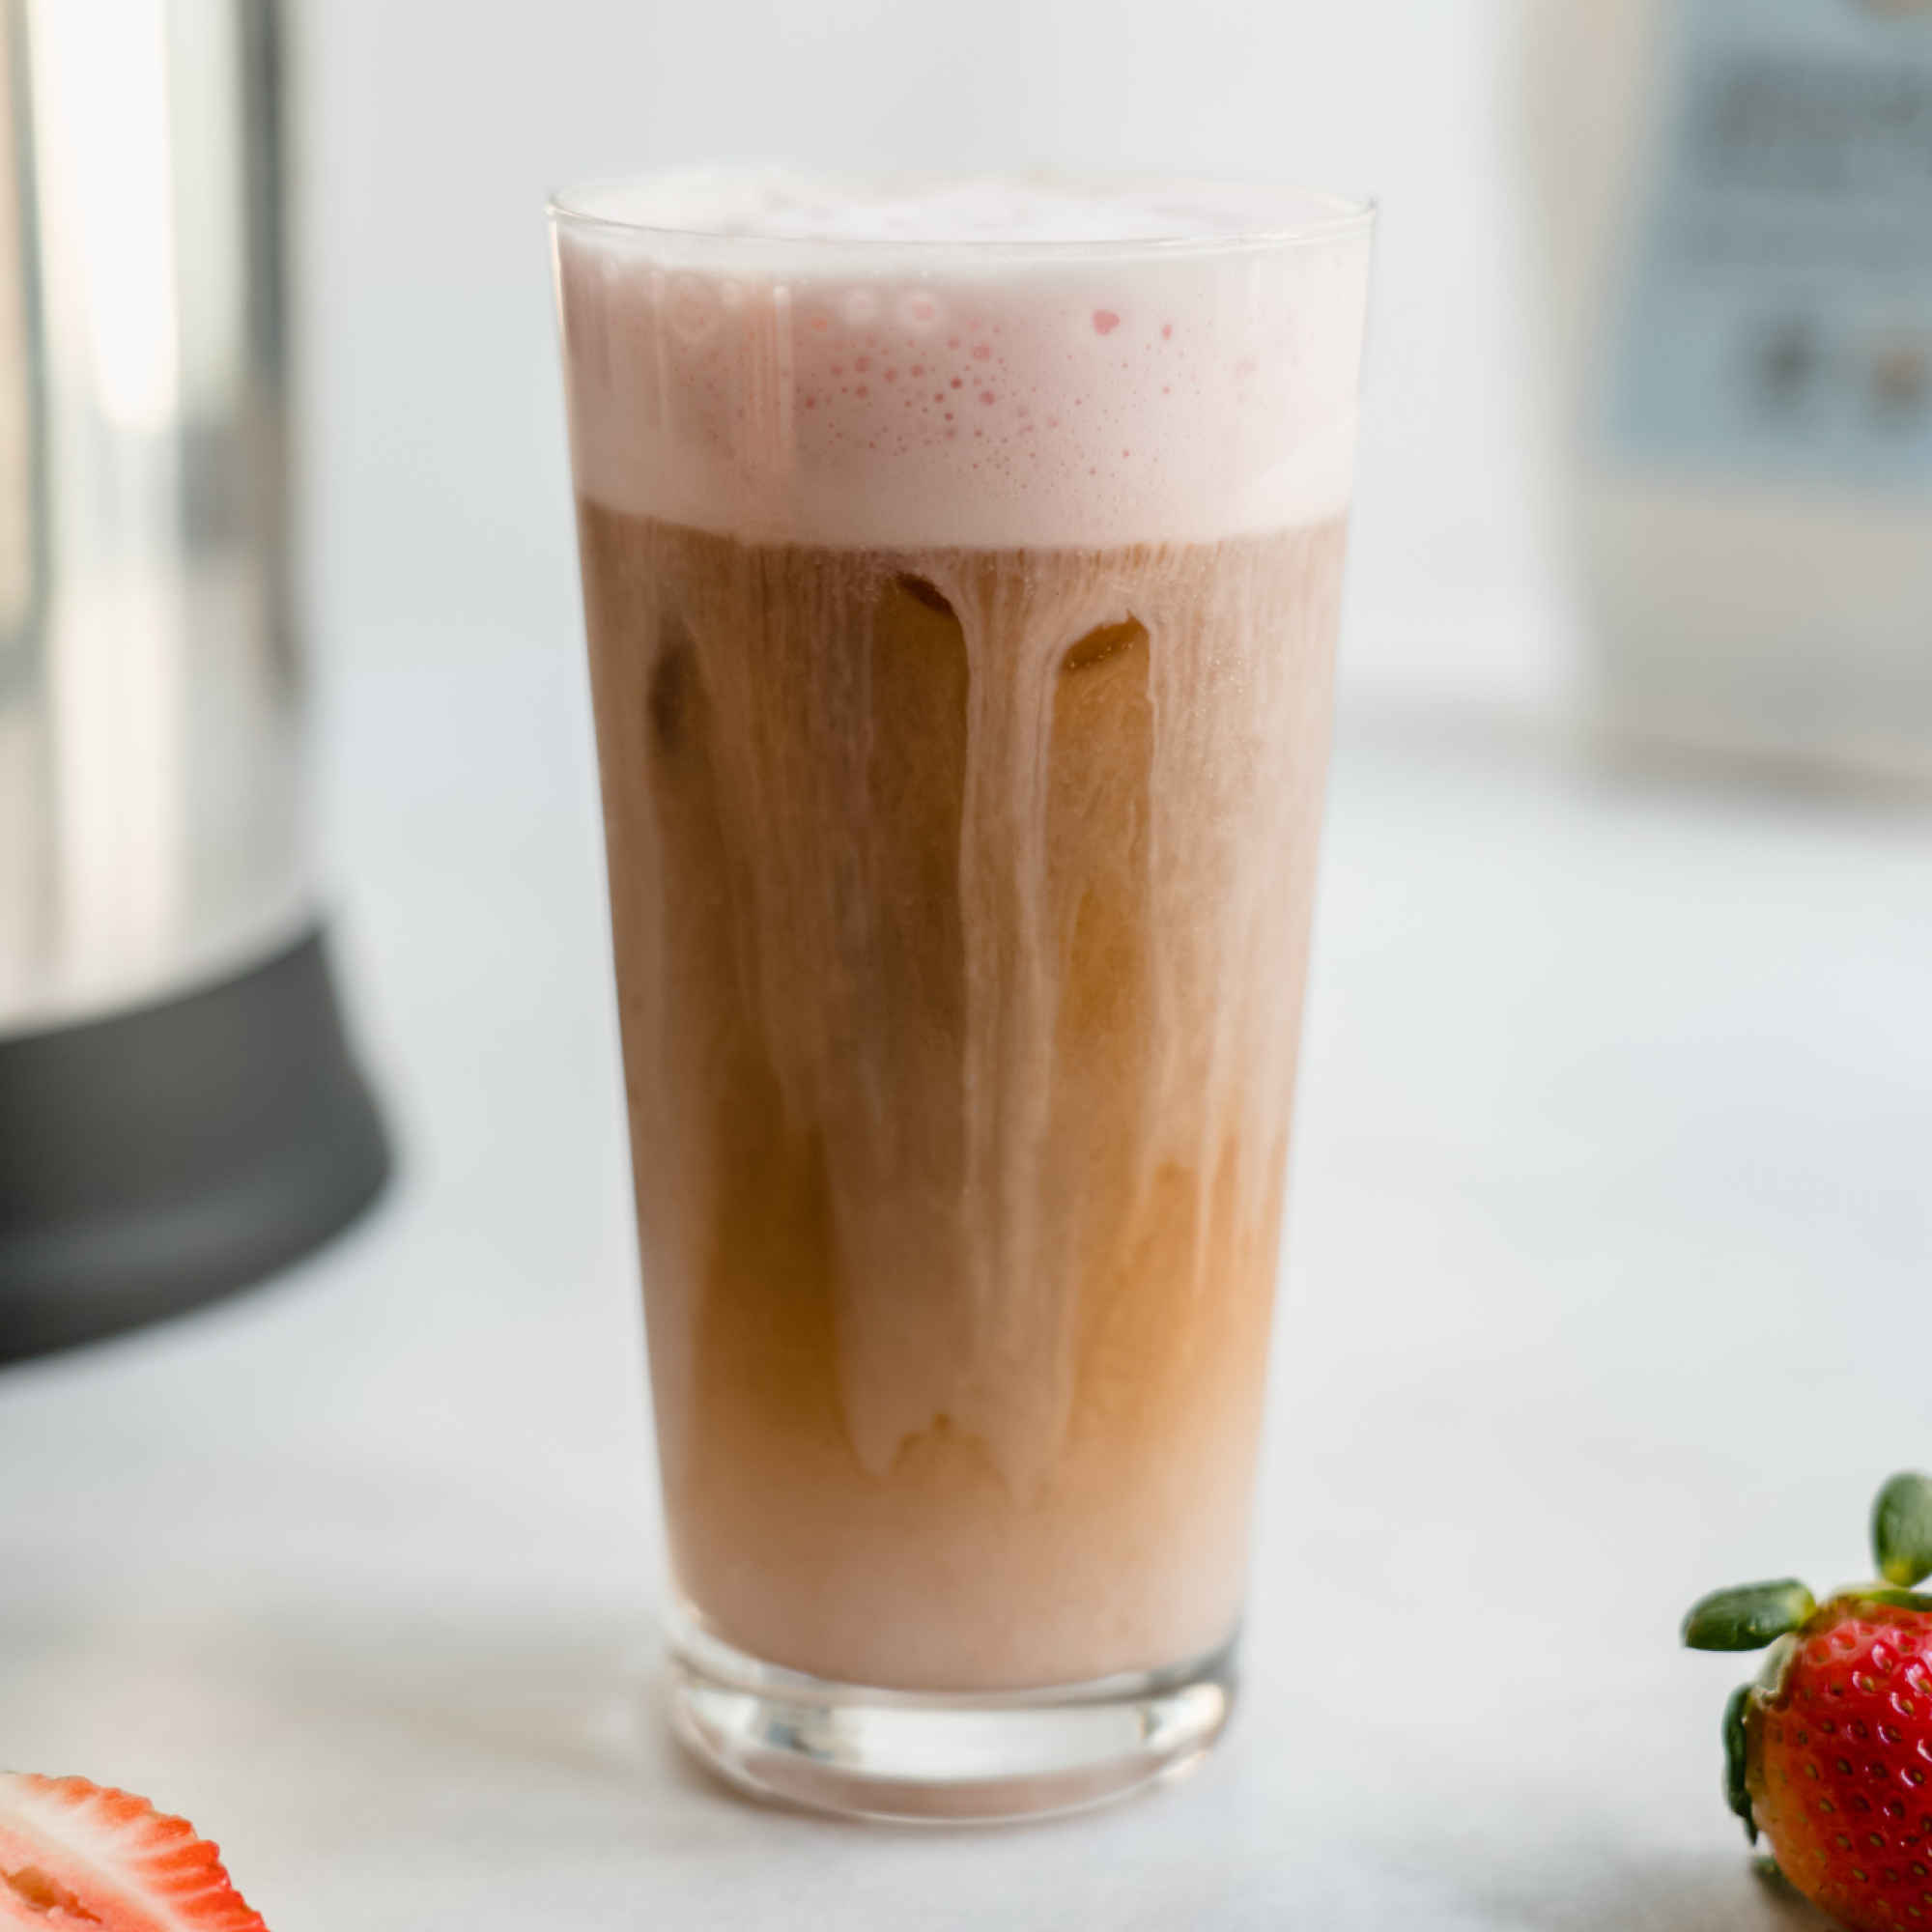 Strawberry Cold Brew made with the Almond Cow! 